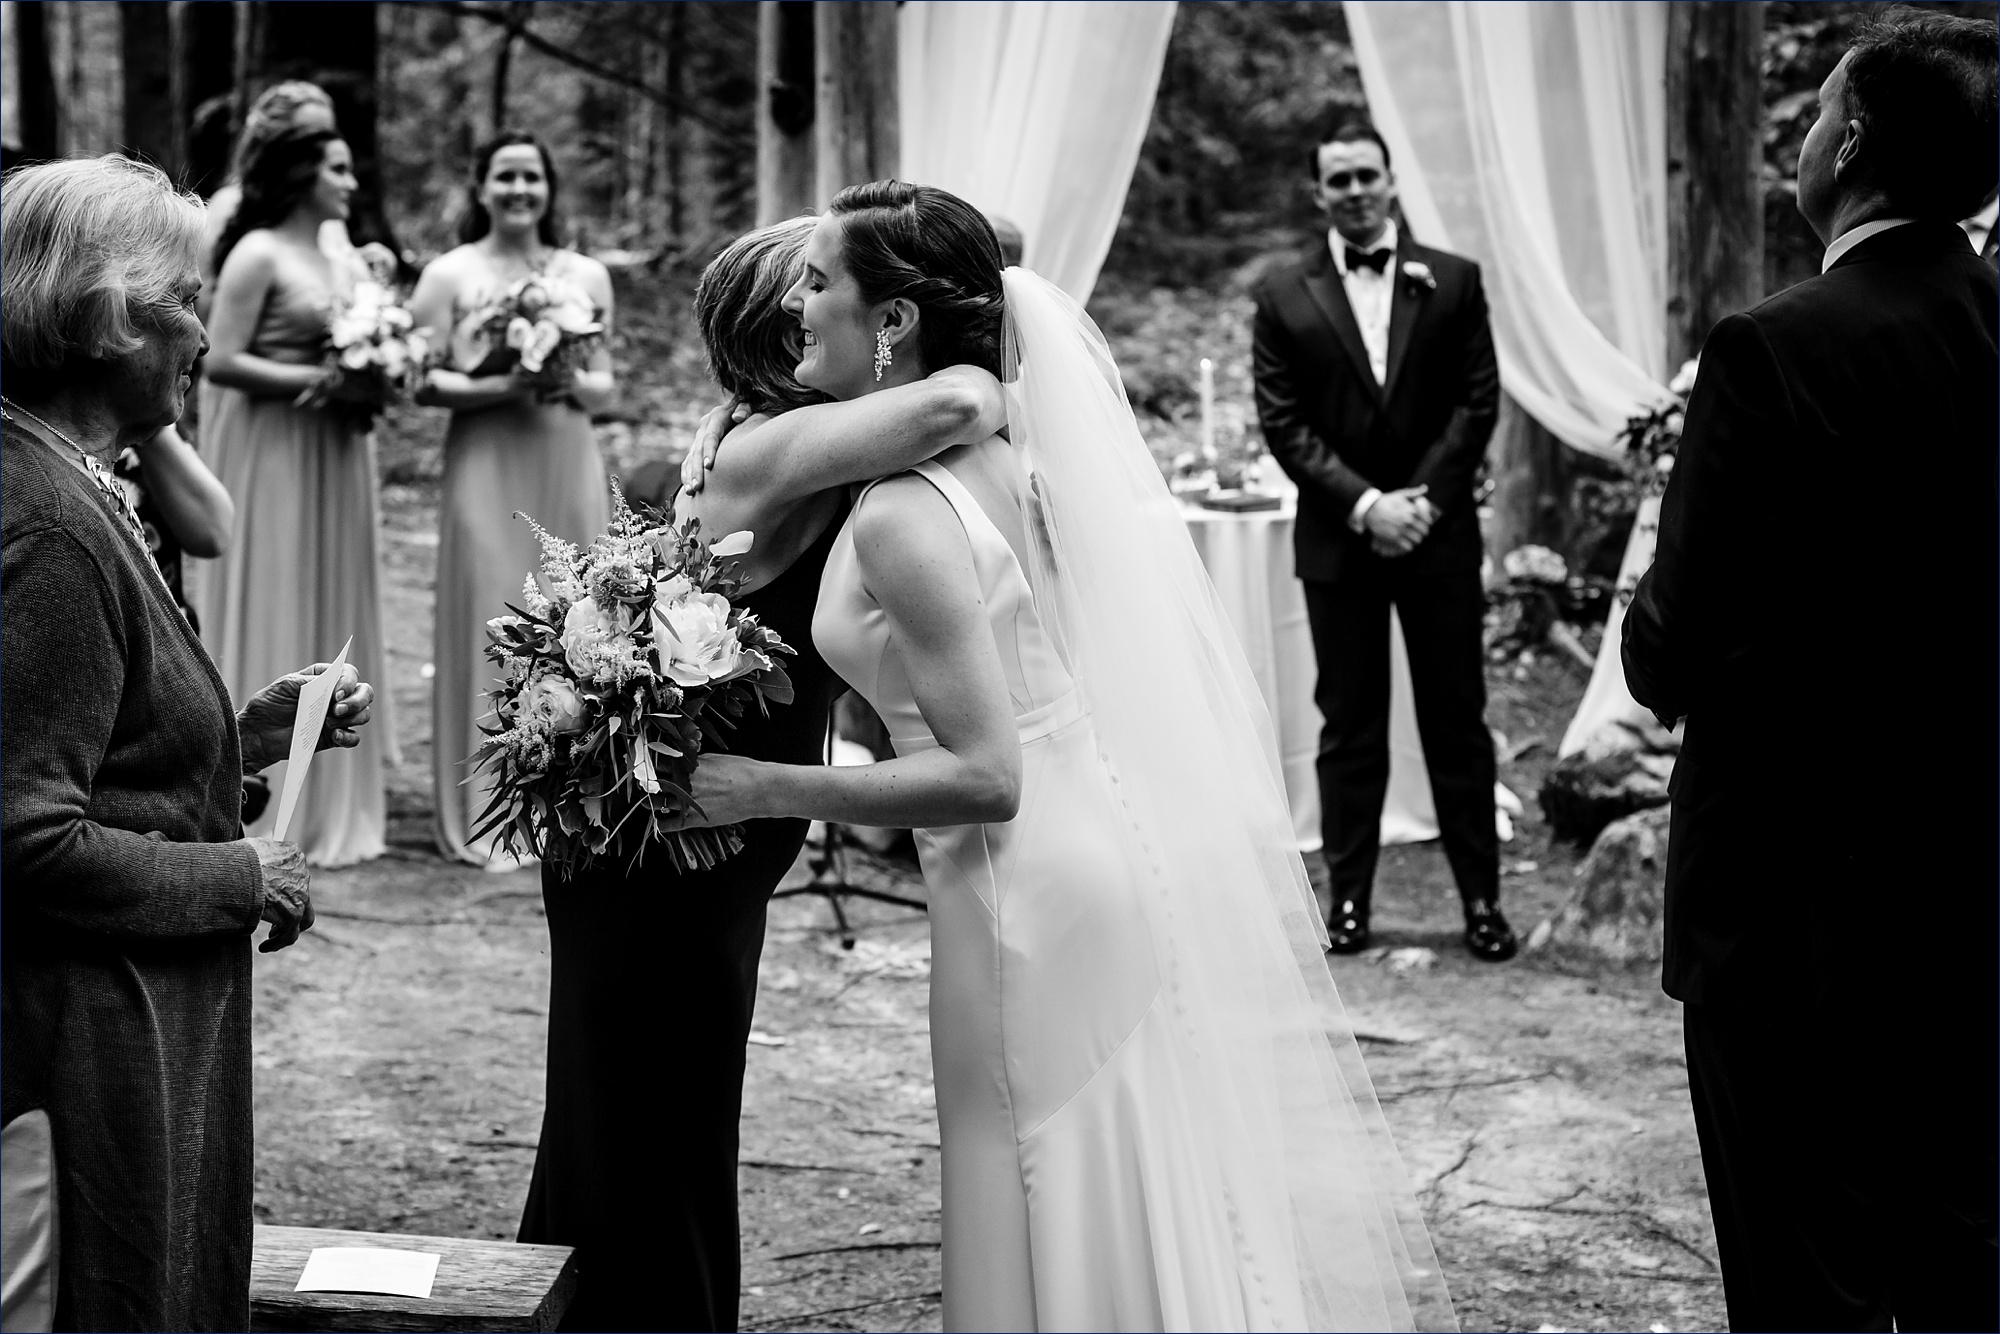 The bride hugs her tearful mom as she comes into the wedding ceremony in the Maine woods